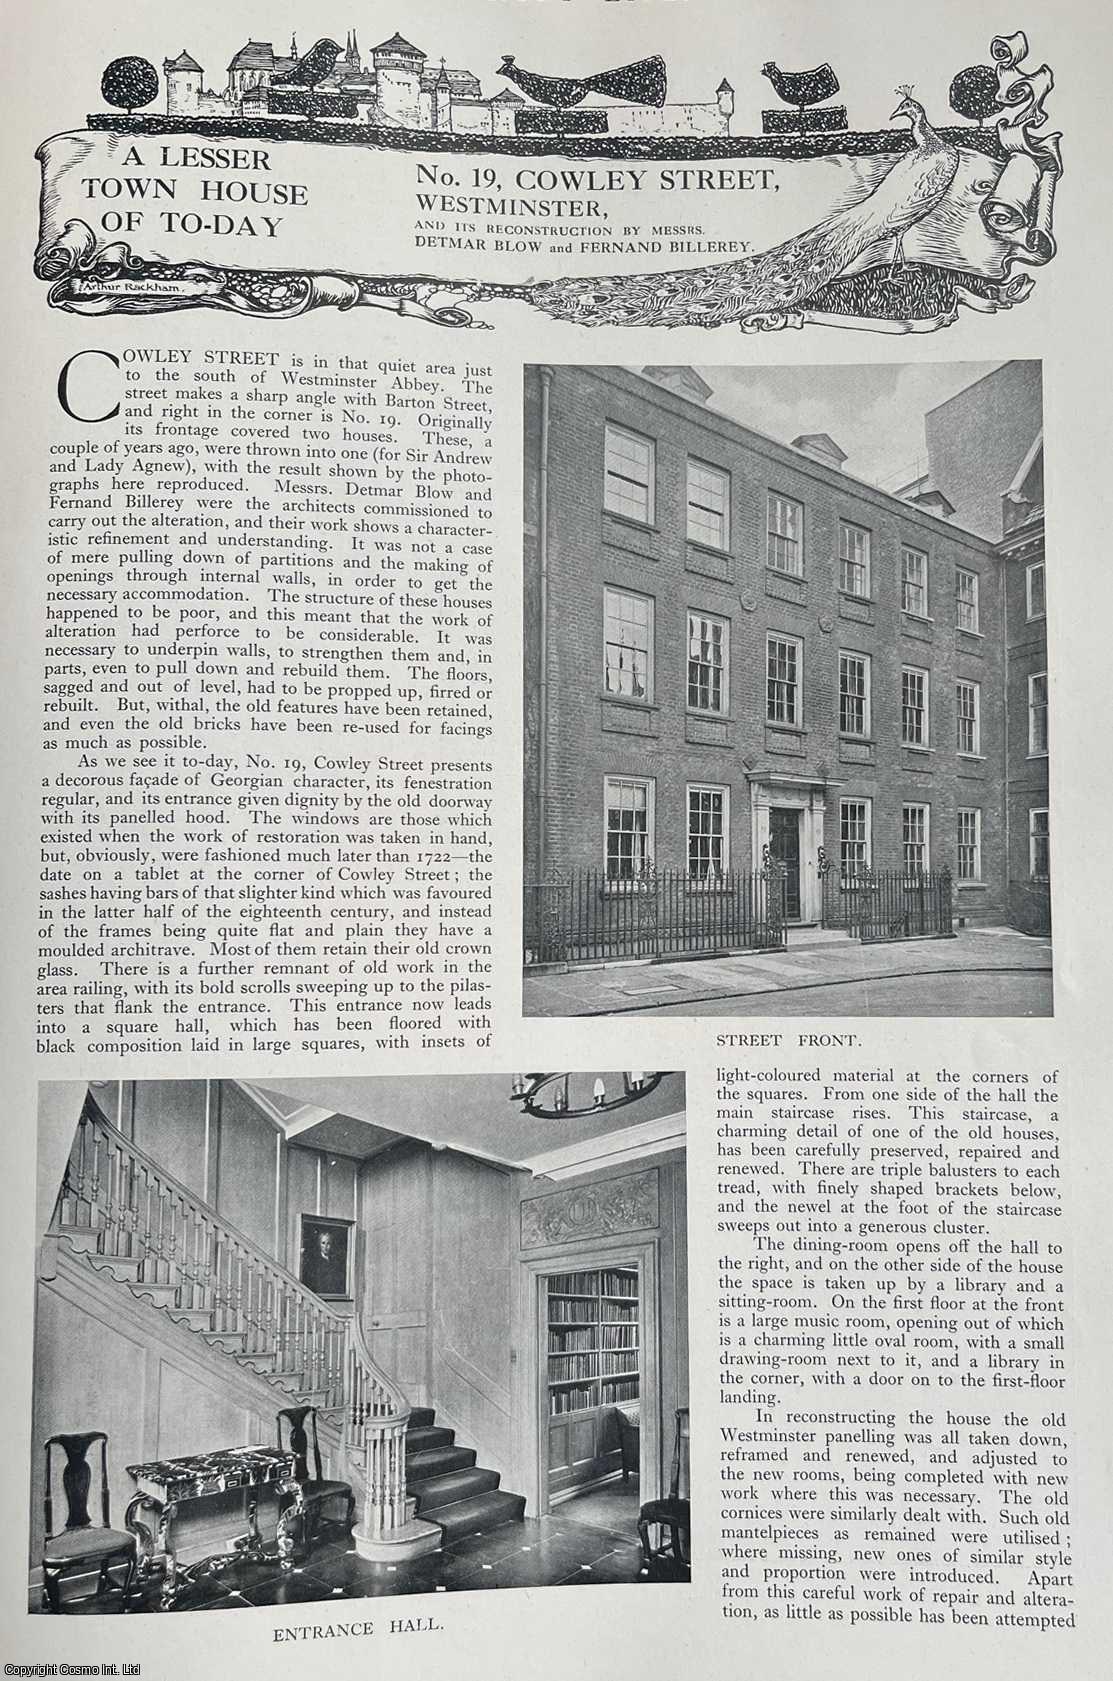 Country Life Magazine - No. 19, Cowley Street, Westminster. Several pictures and accompanying text, removed from an original issue of Country Life Magazine, 1923.